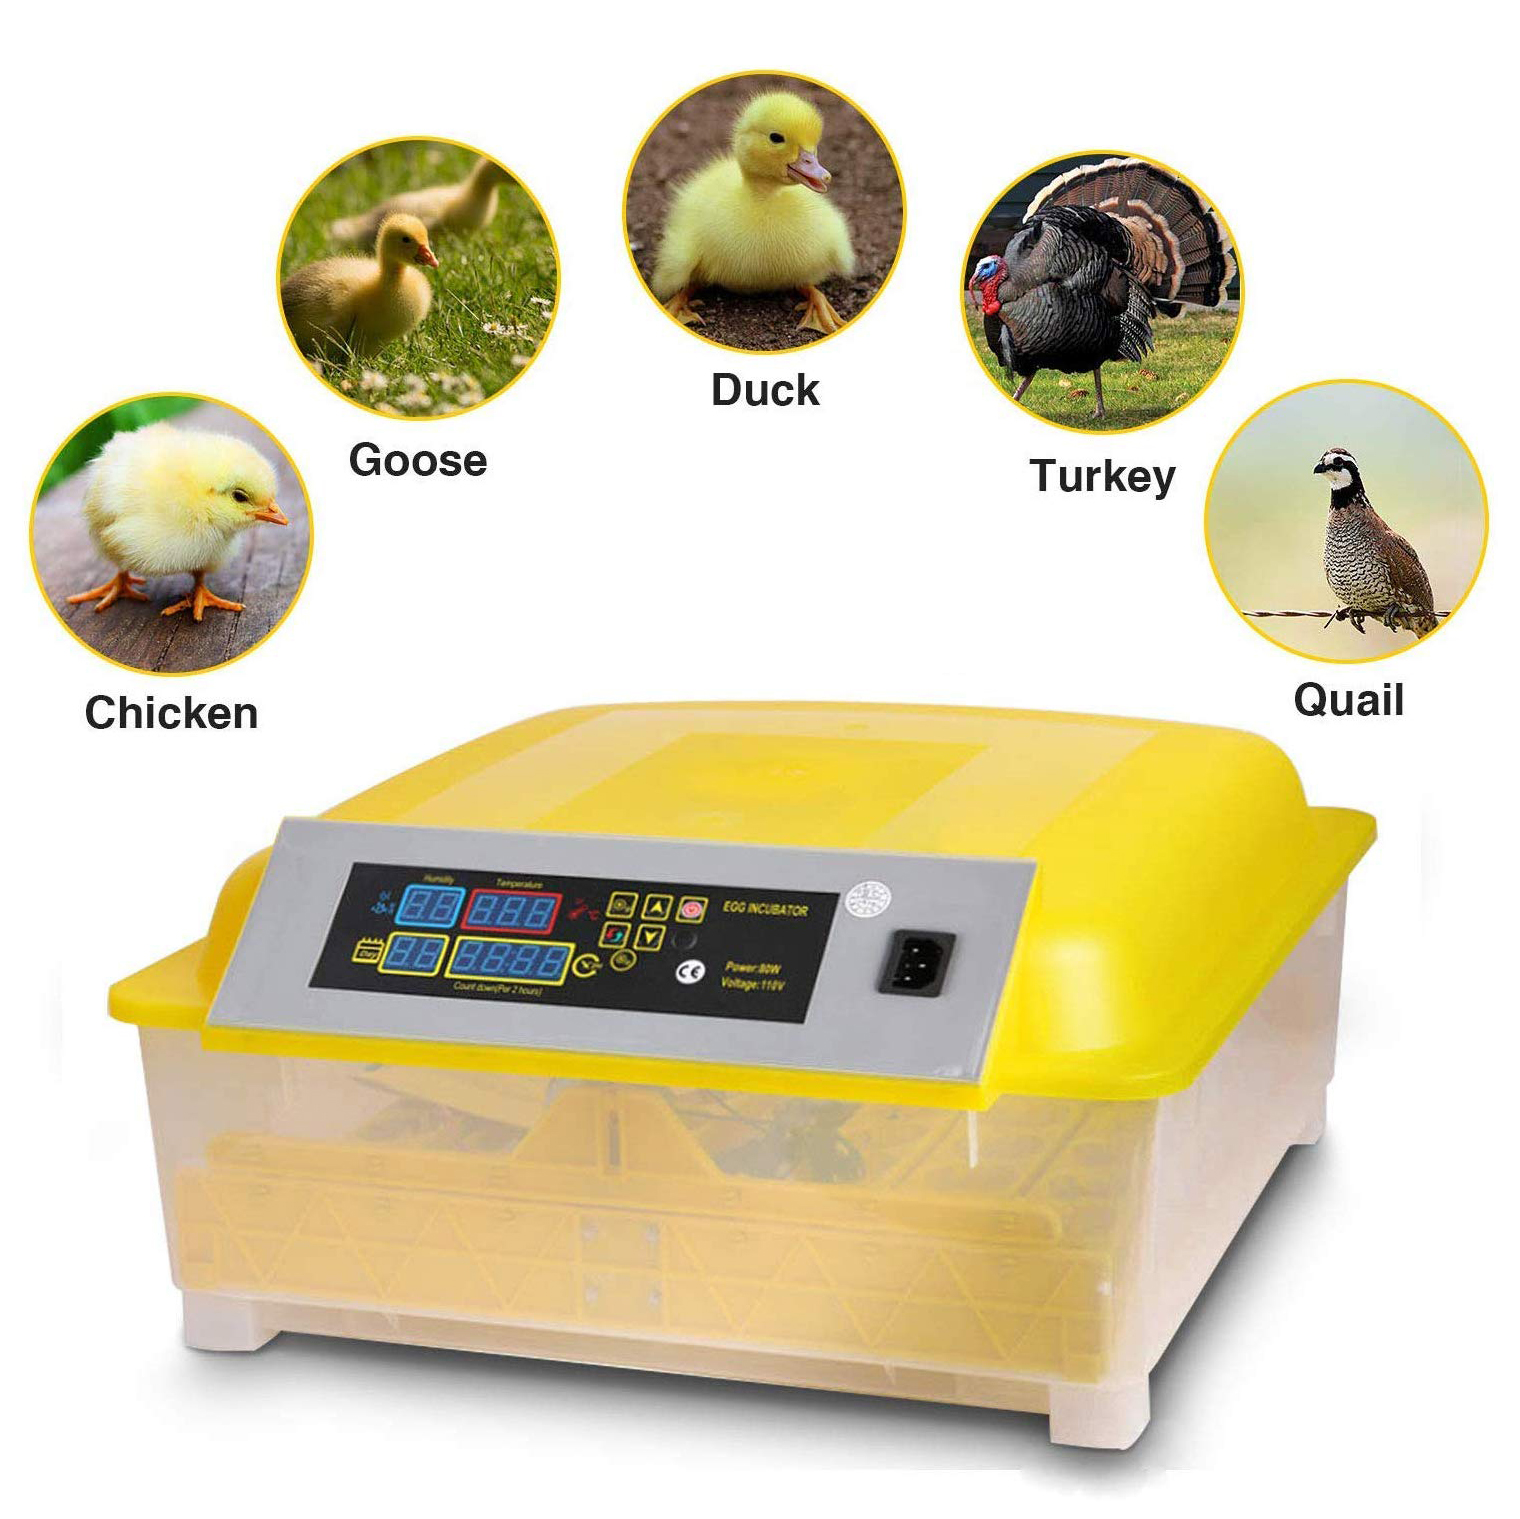 best incubator for chickens